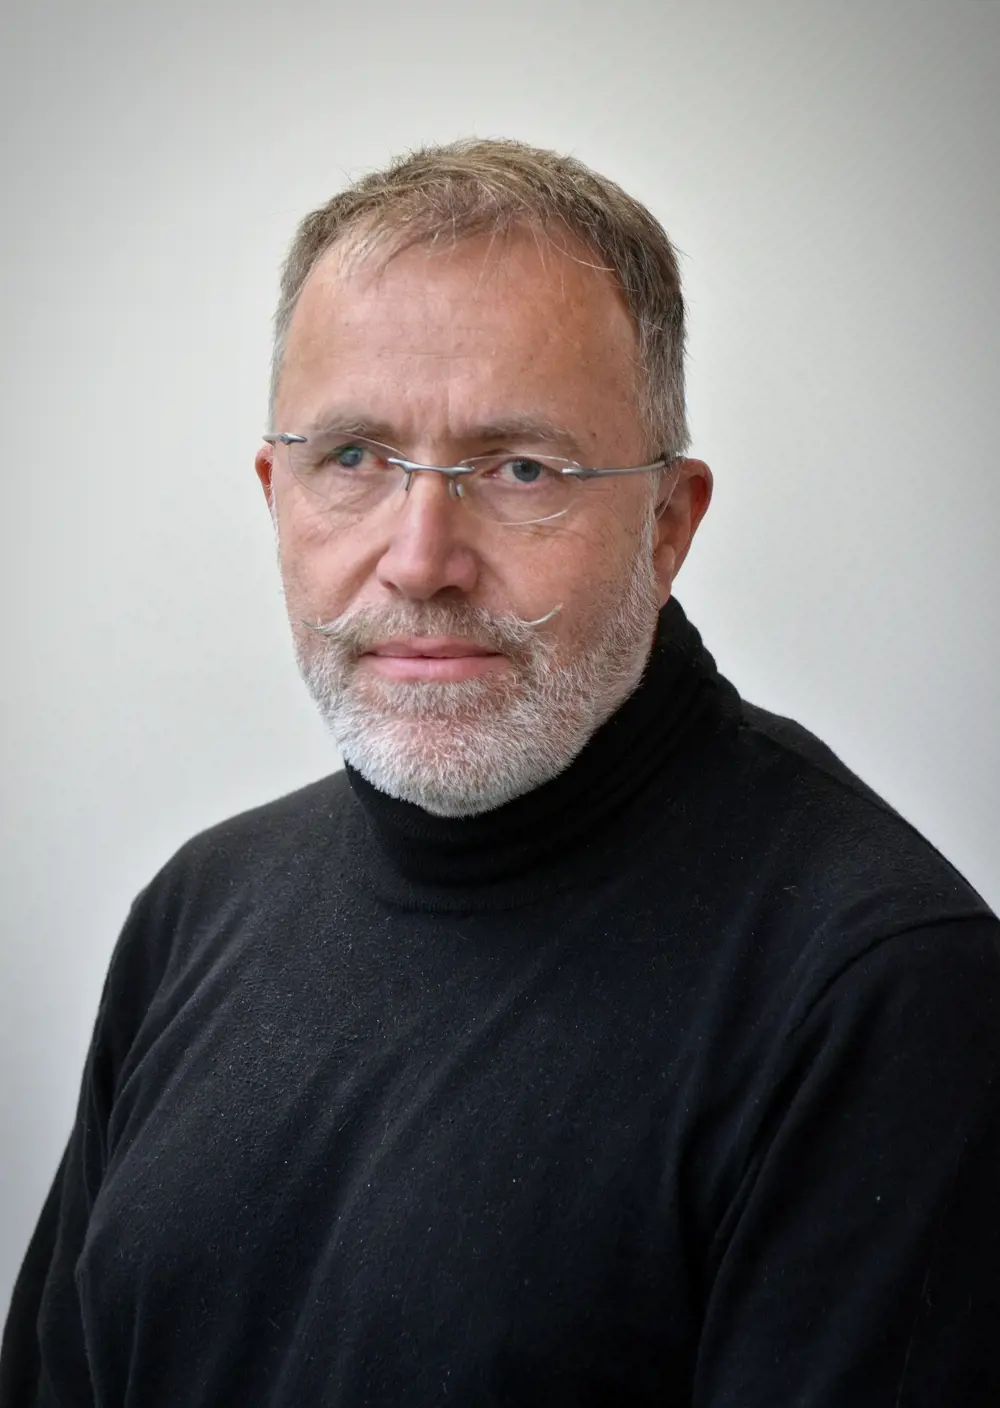 A man wearing glasses and a black top looks at the camera